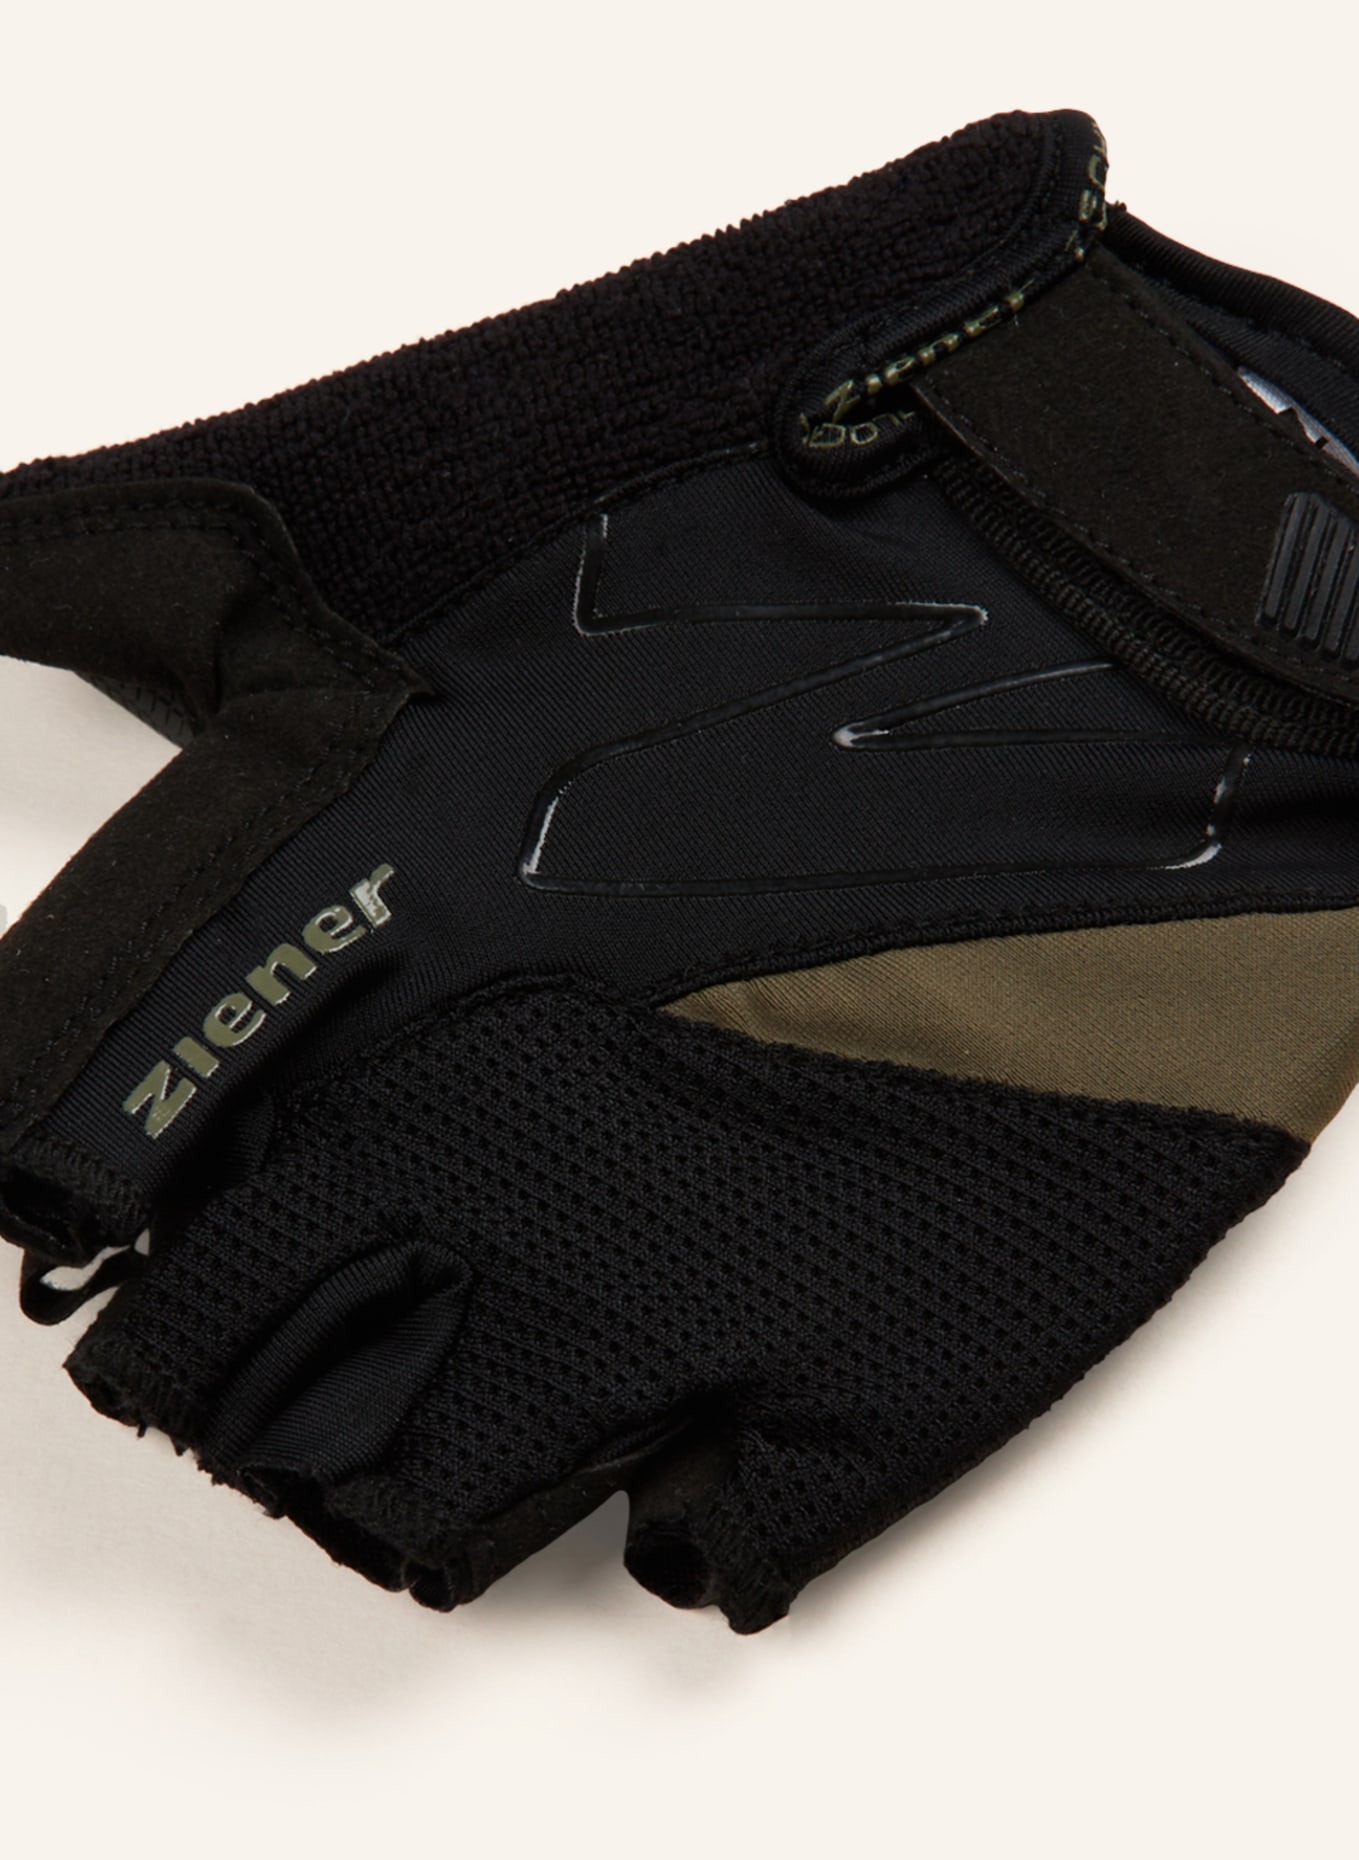 ziener Cycling gloves CRAVE in khaki black